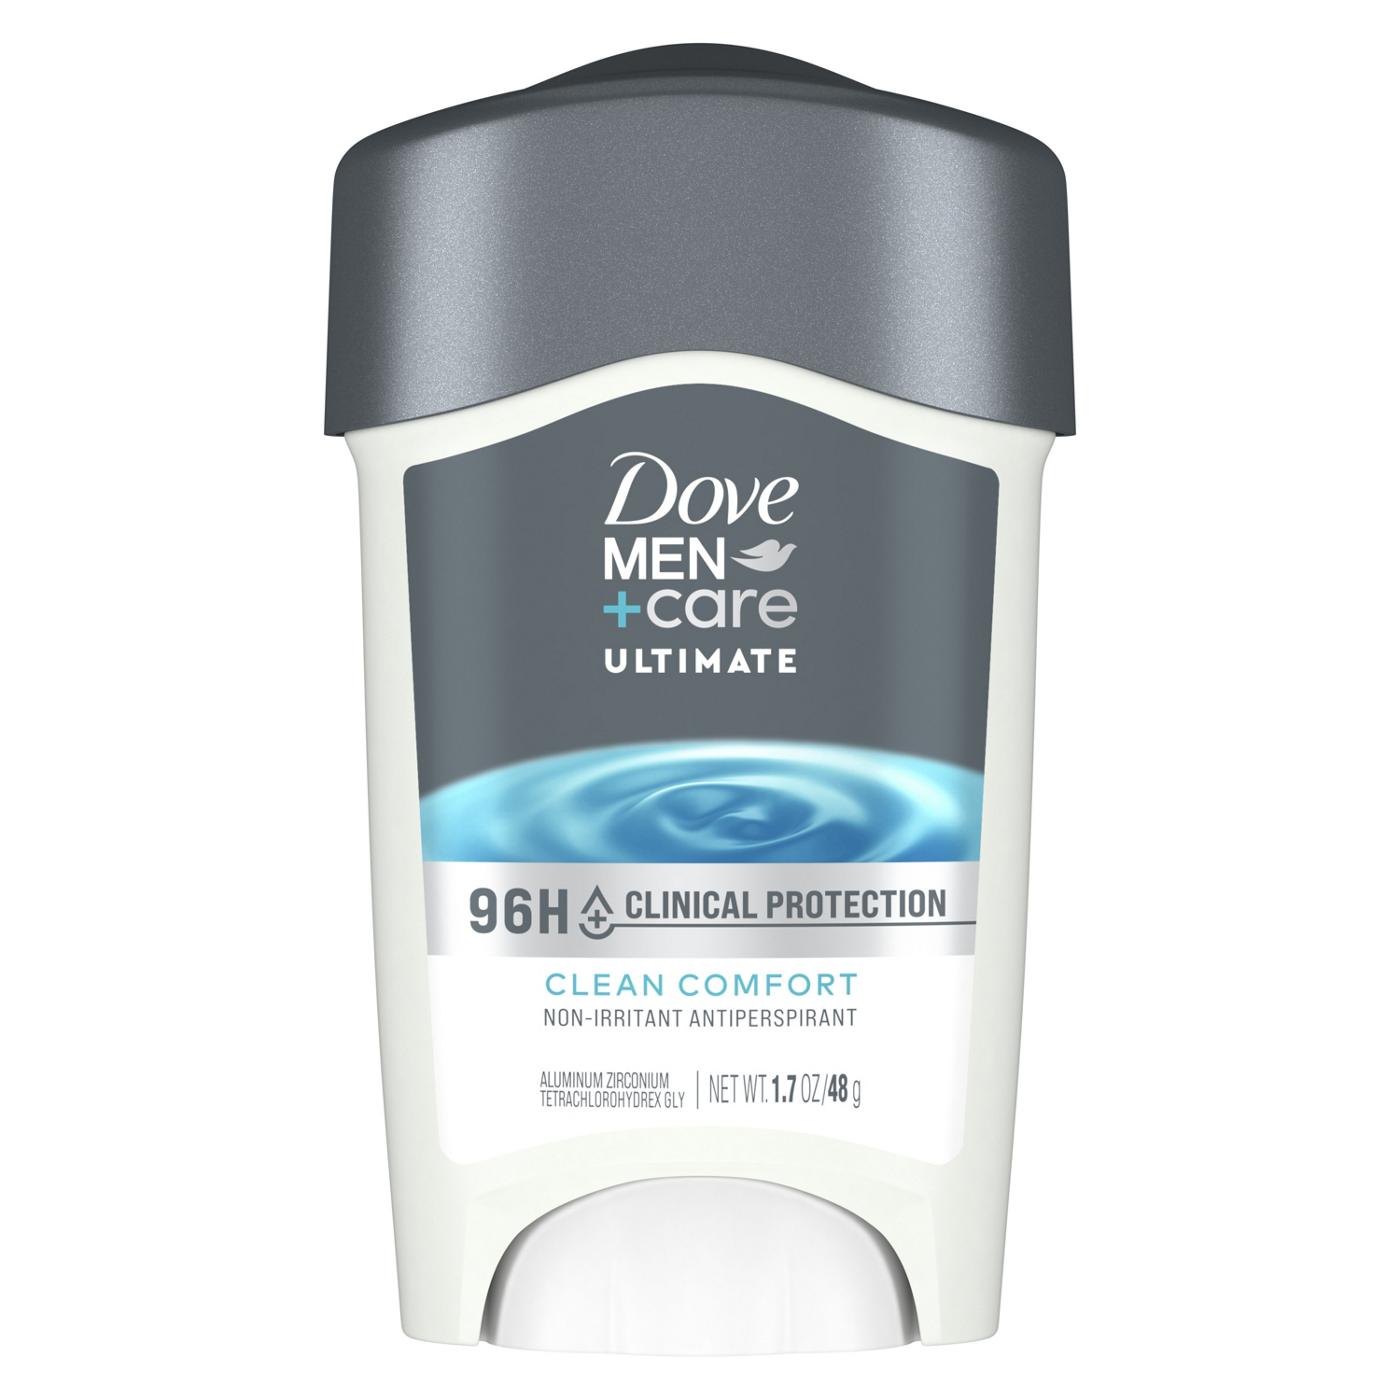 Dove Men+Care Clinical Protection Antiperspirant - Clean Comfort; image 1 of 7